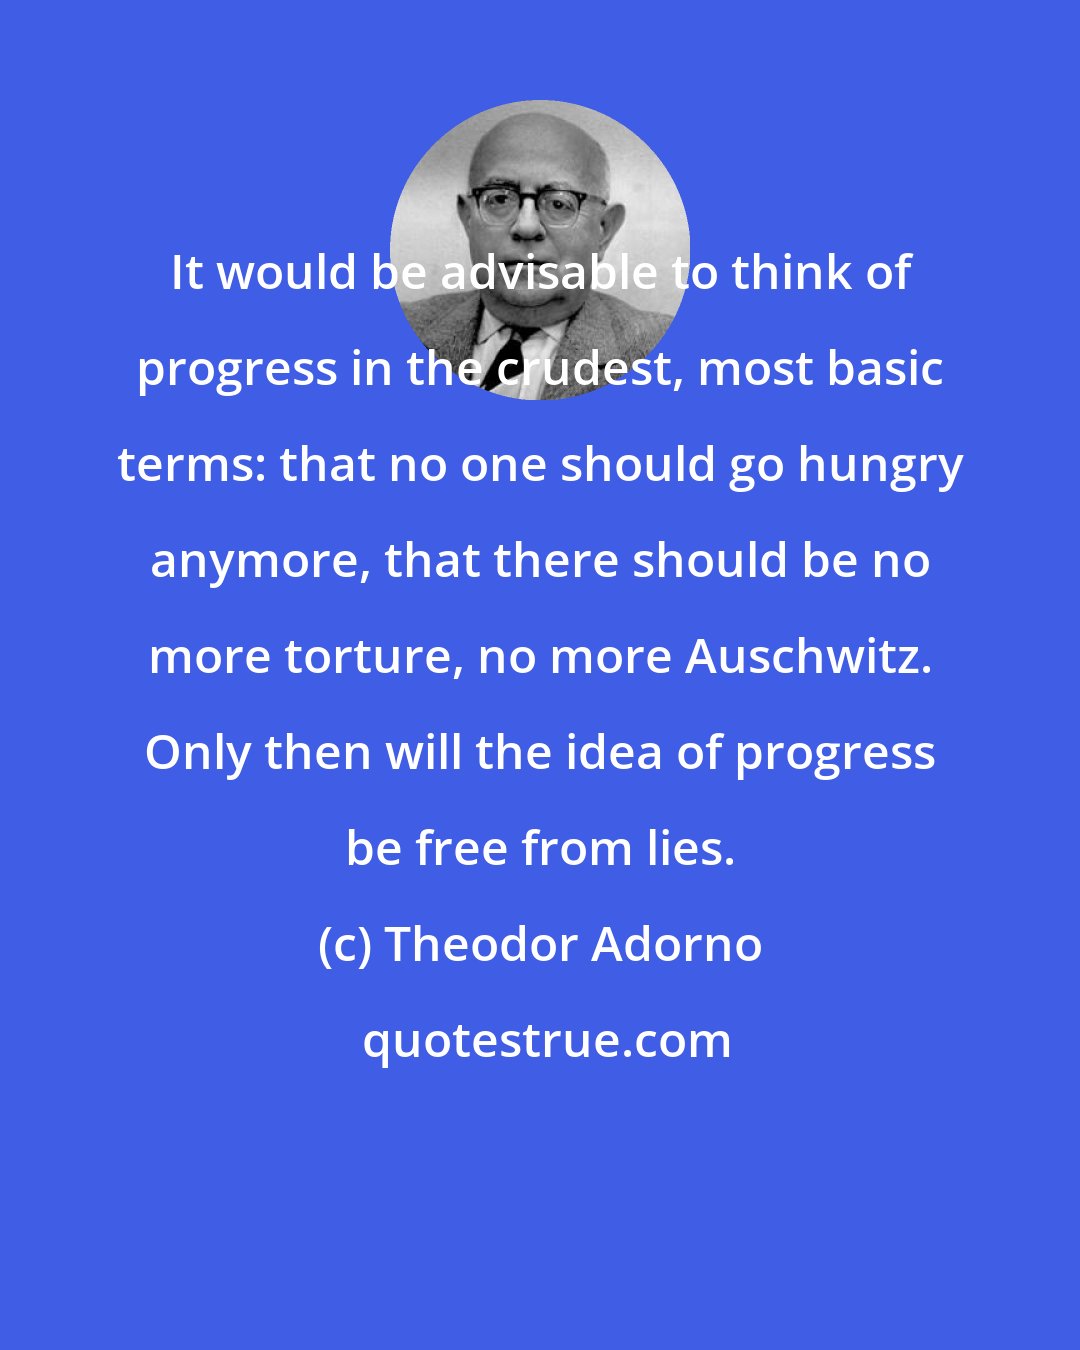 Theodor Adorno: It would be advisable to think of progress in the crudest, most basic terms: that no one should go hungry anymore, that there should be no more torture, no more Auschwitz. Only then will the idea of progress be free from lies.